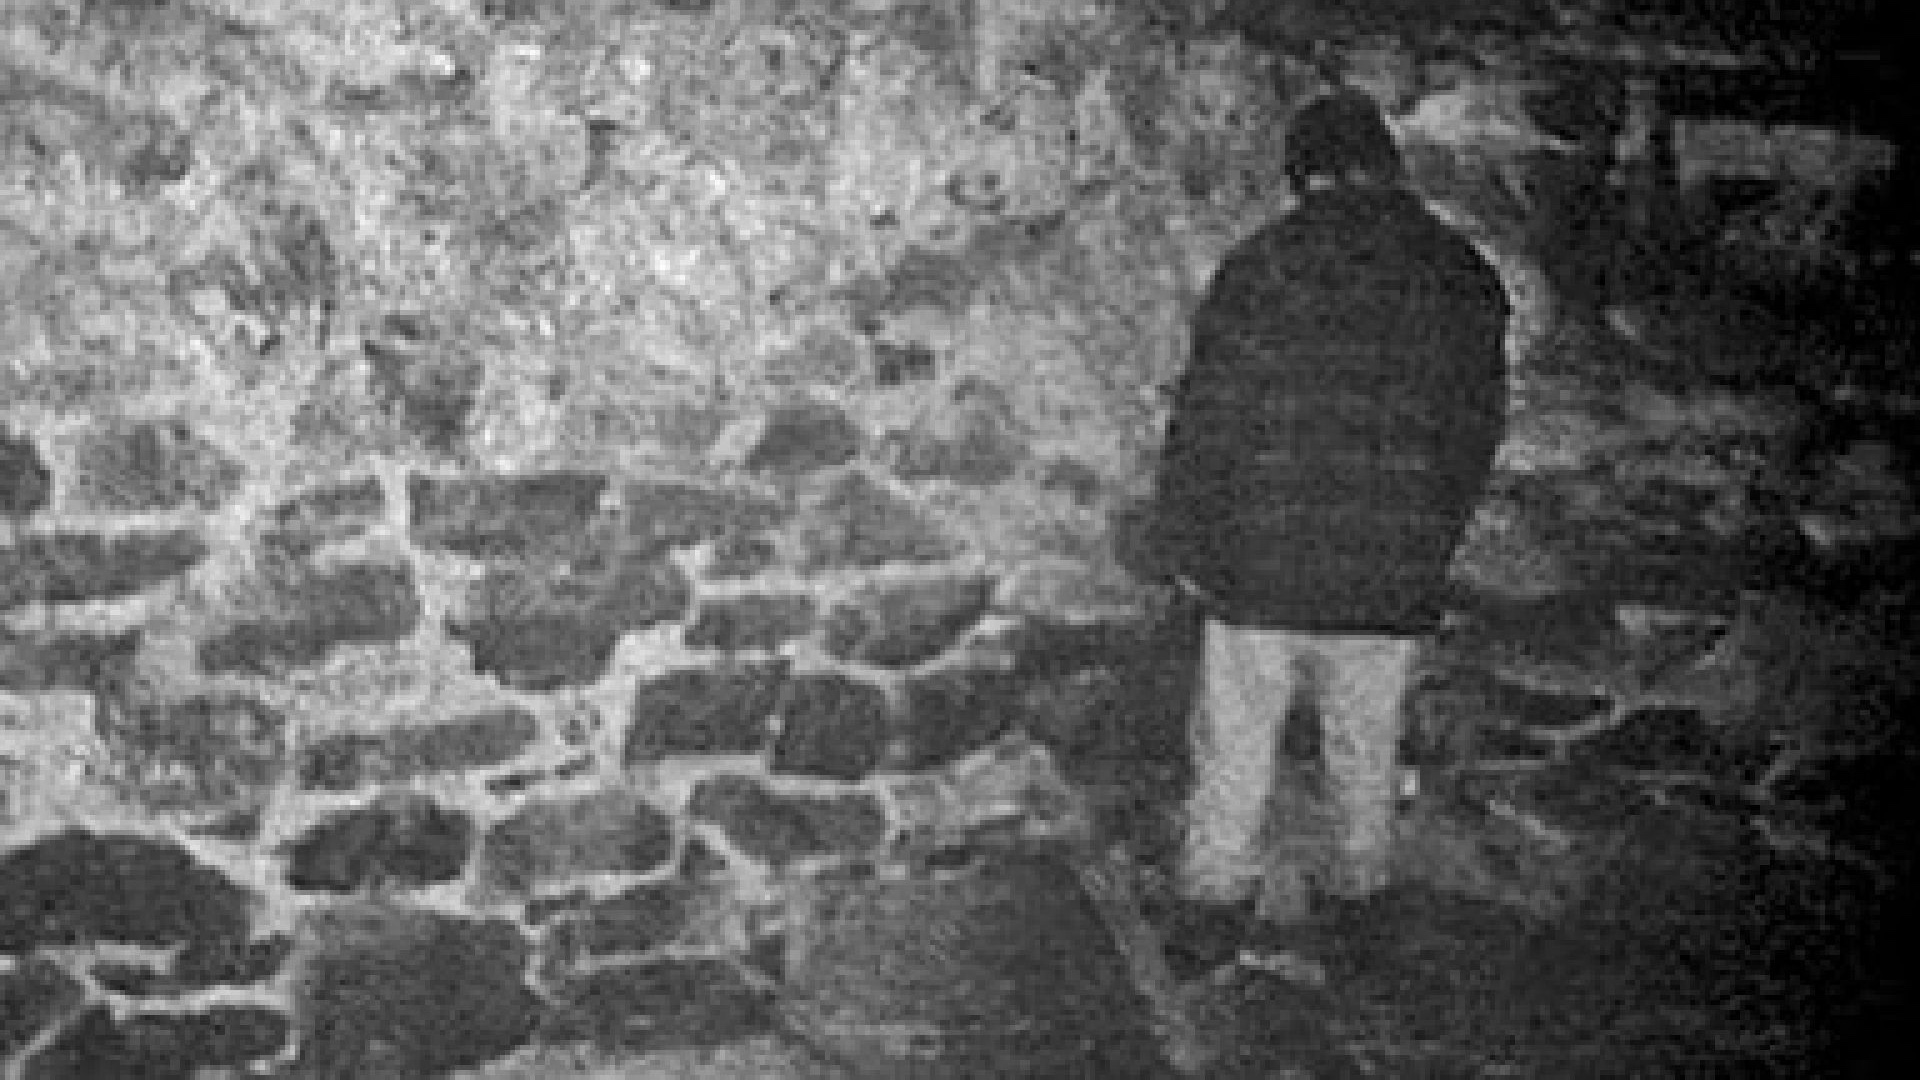 Image result for the blair witch project